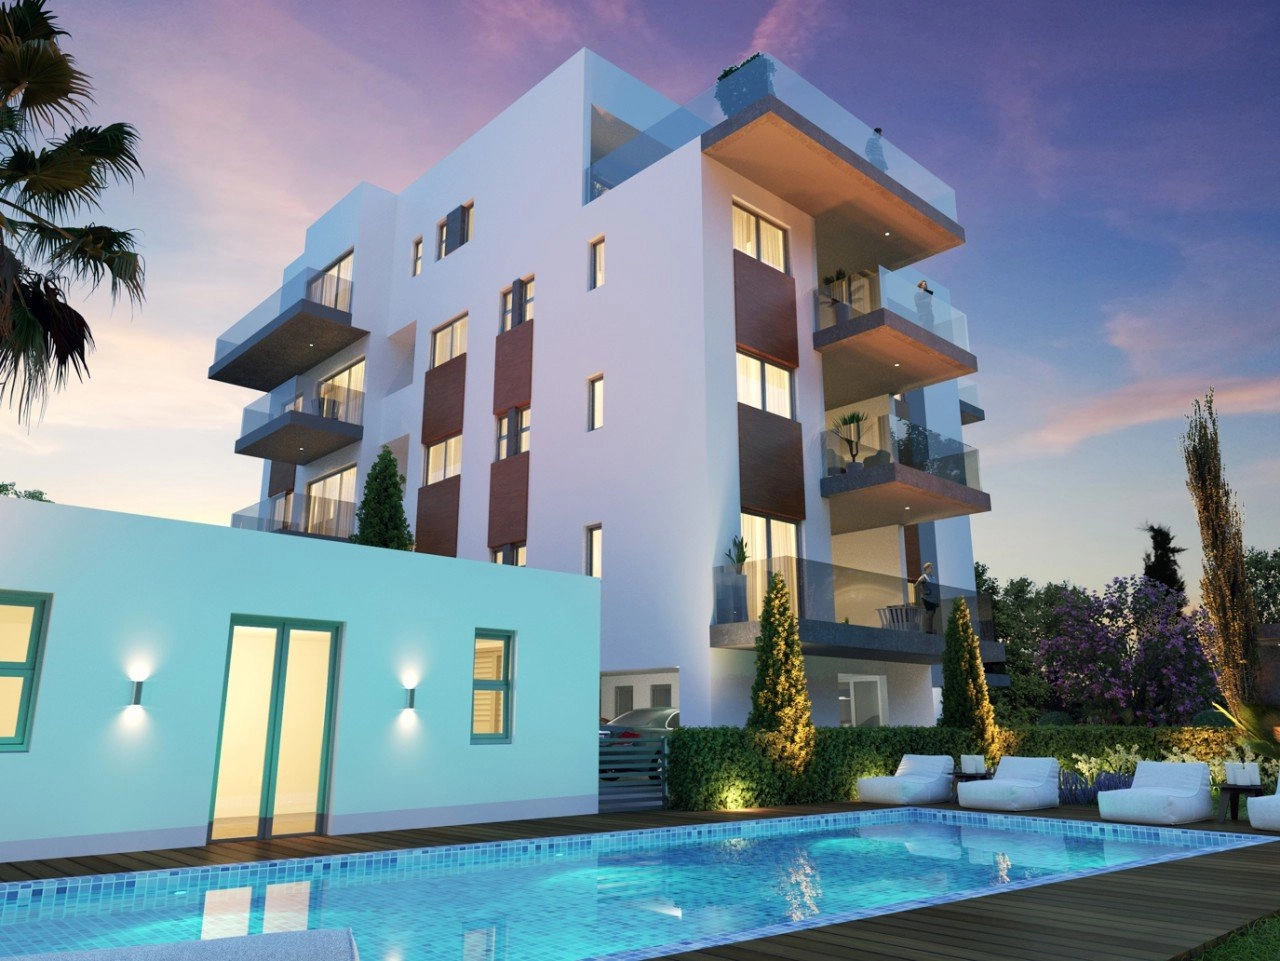 4 Bedroom Apartment for Sale in Limassol – Agios Athanasios